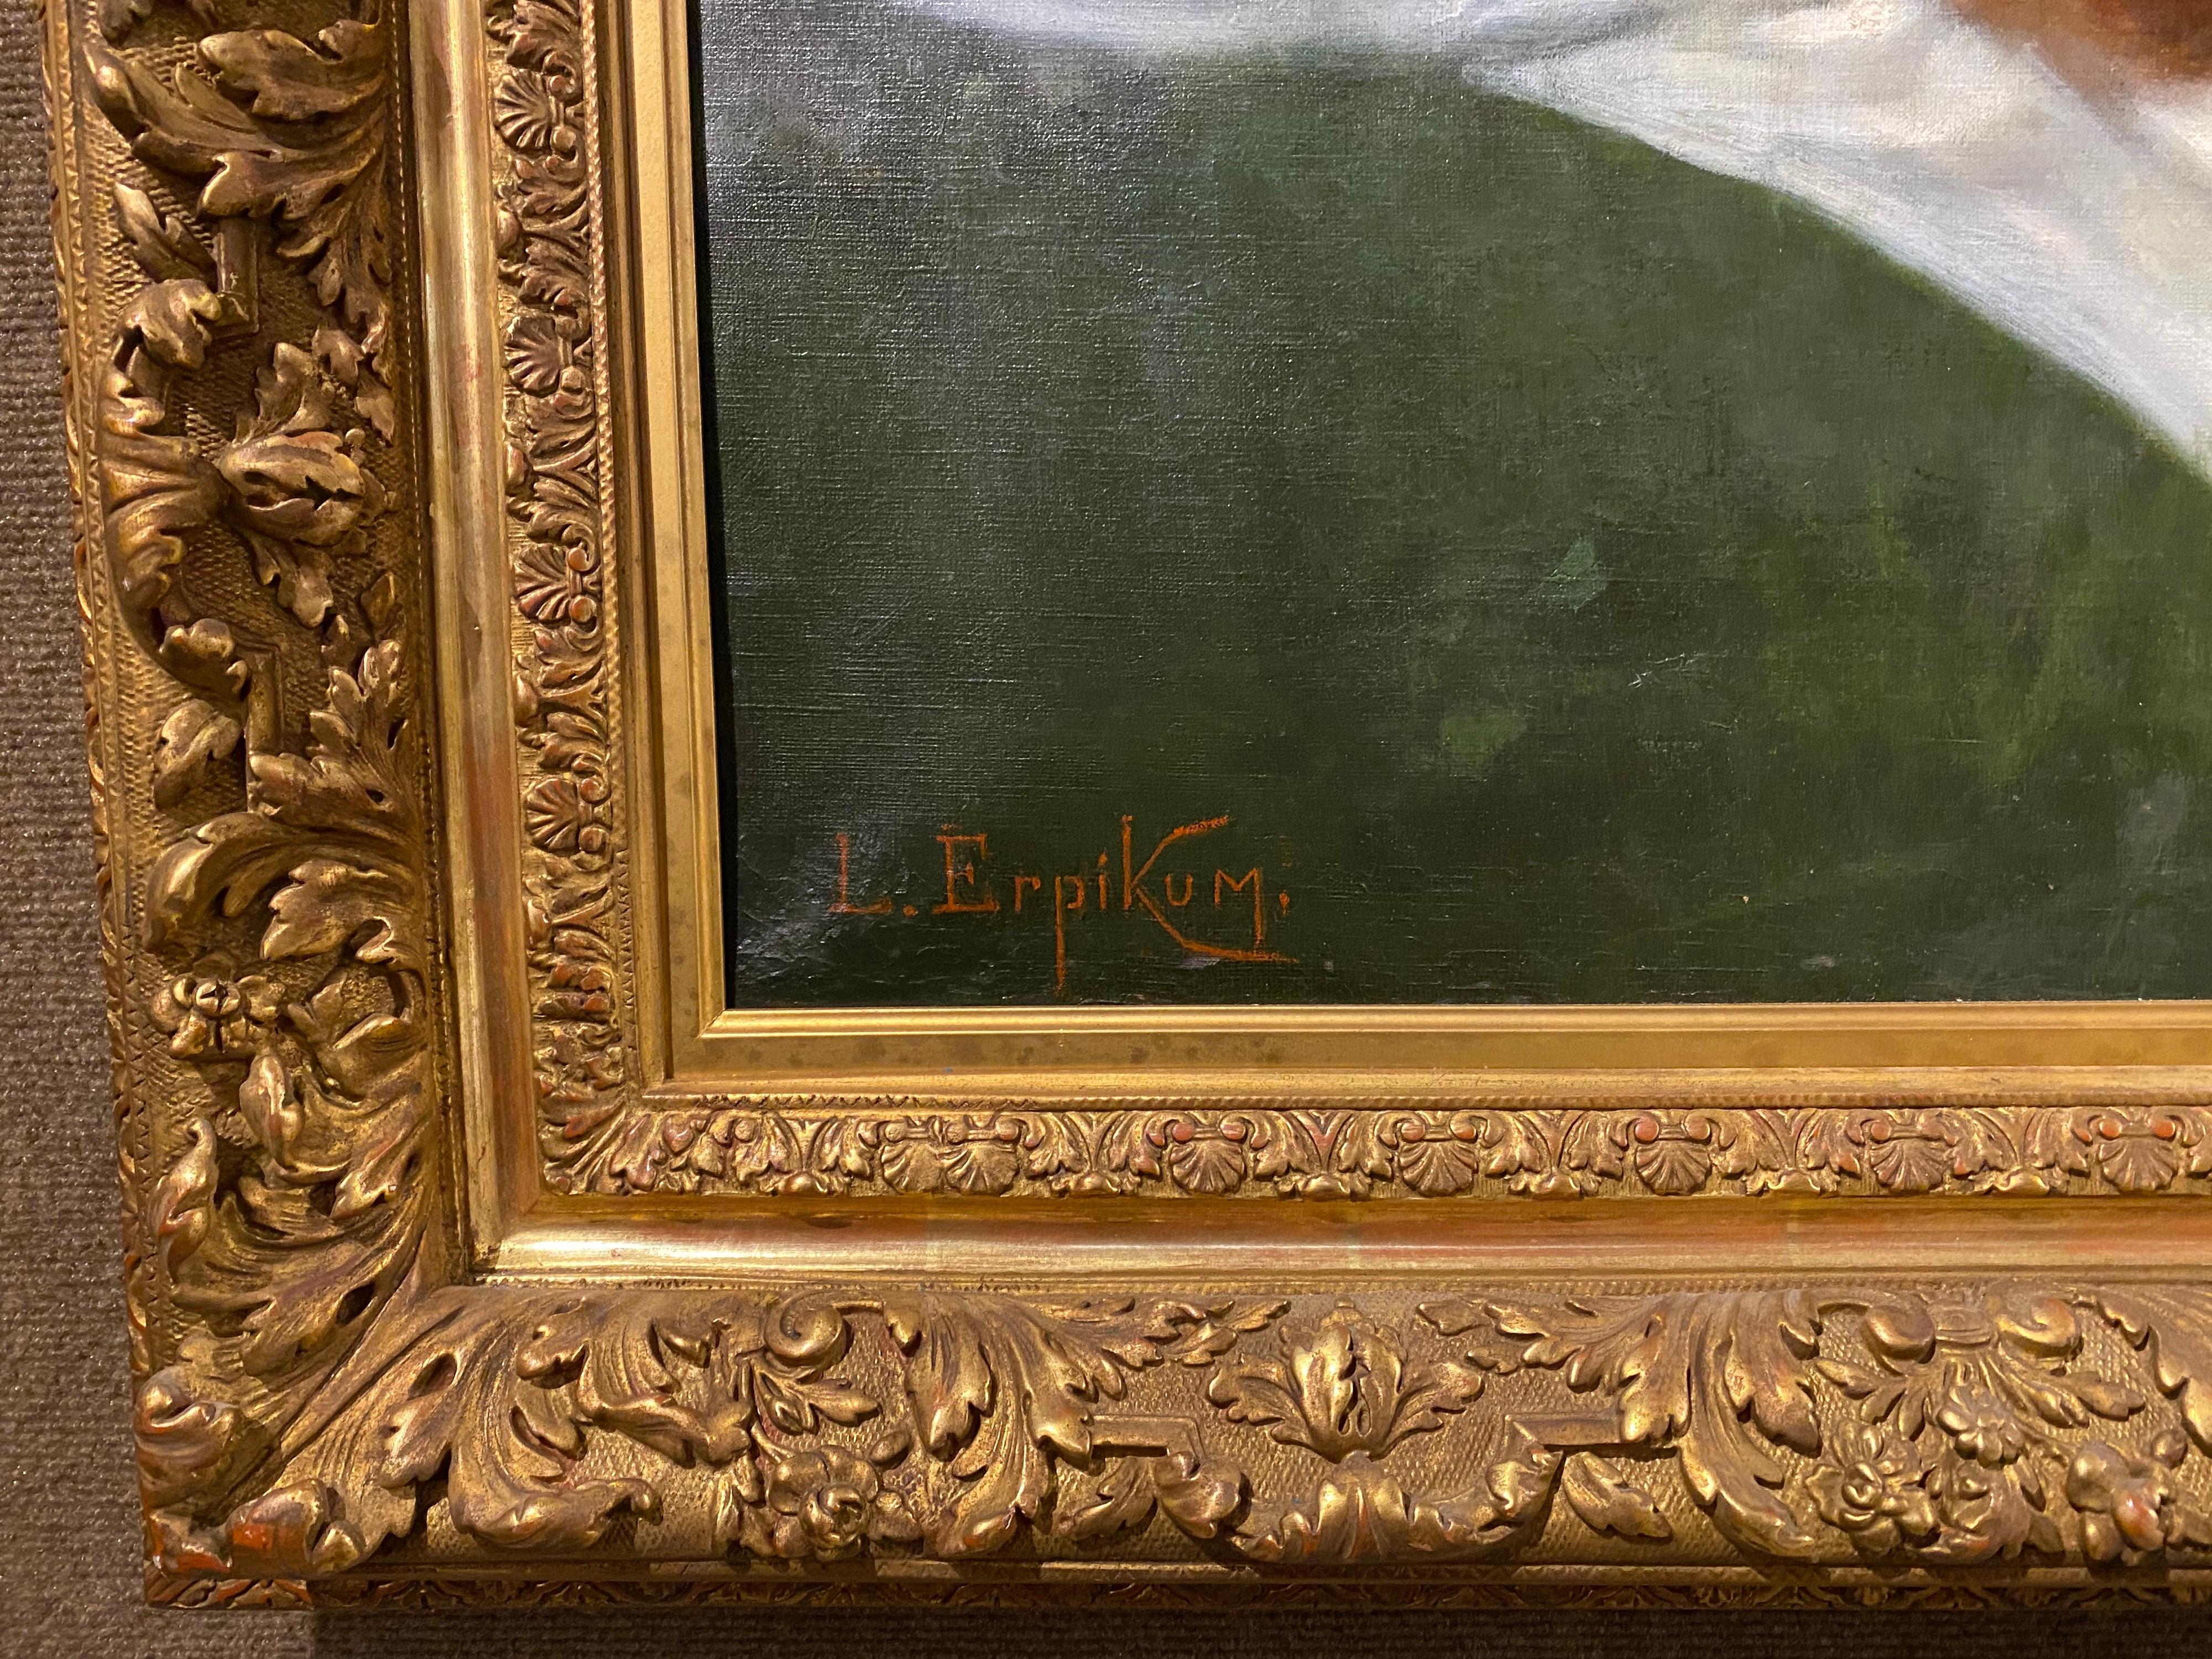 Large 19th century French oil on canvas nude by Leon Erpikum, in a heavy carved gilt wood frame. Signed on bottom left L. Erpikum & dated 1889 on bottom right, finely painted of a nude with long red hair laying on her drape. Laying in a 19th century